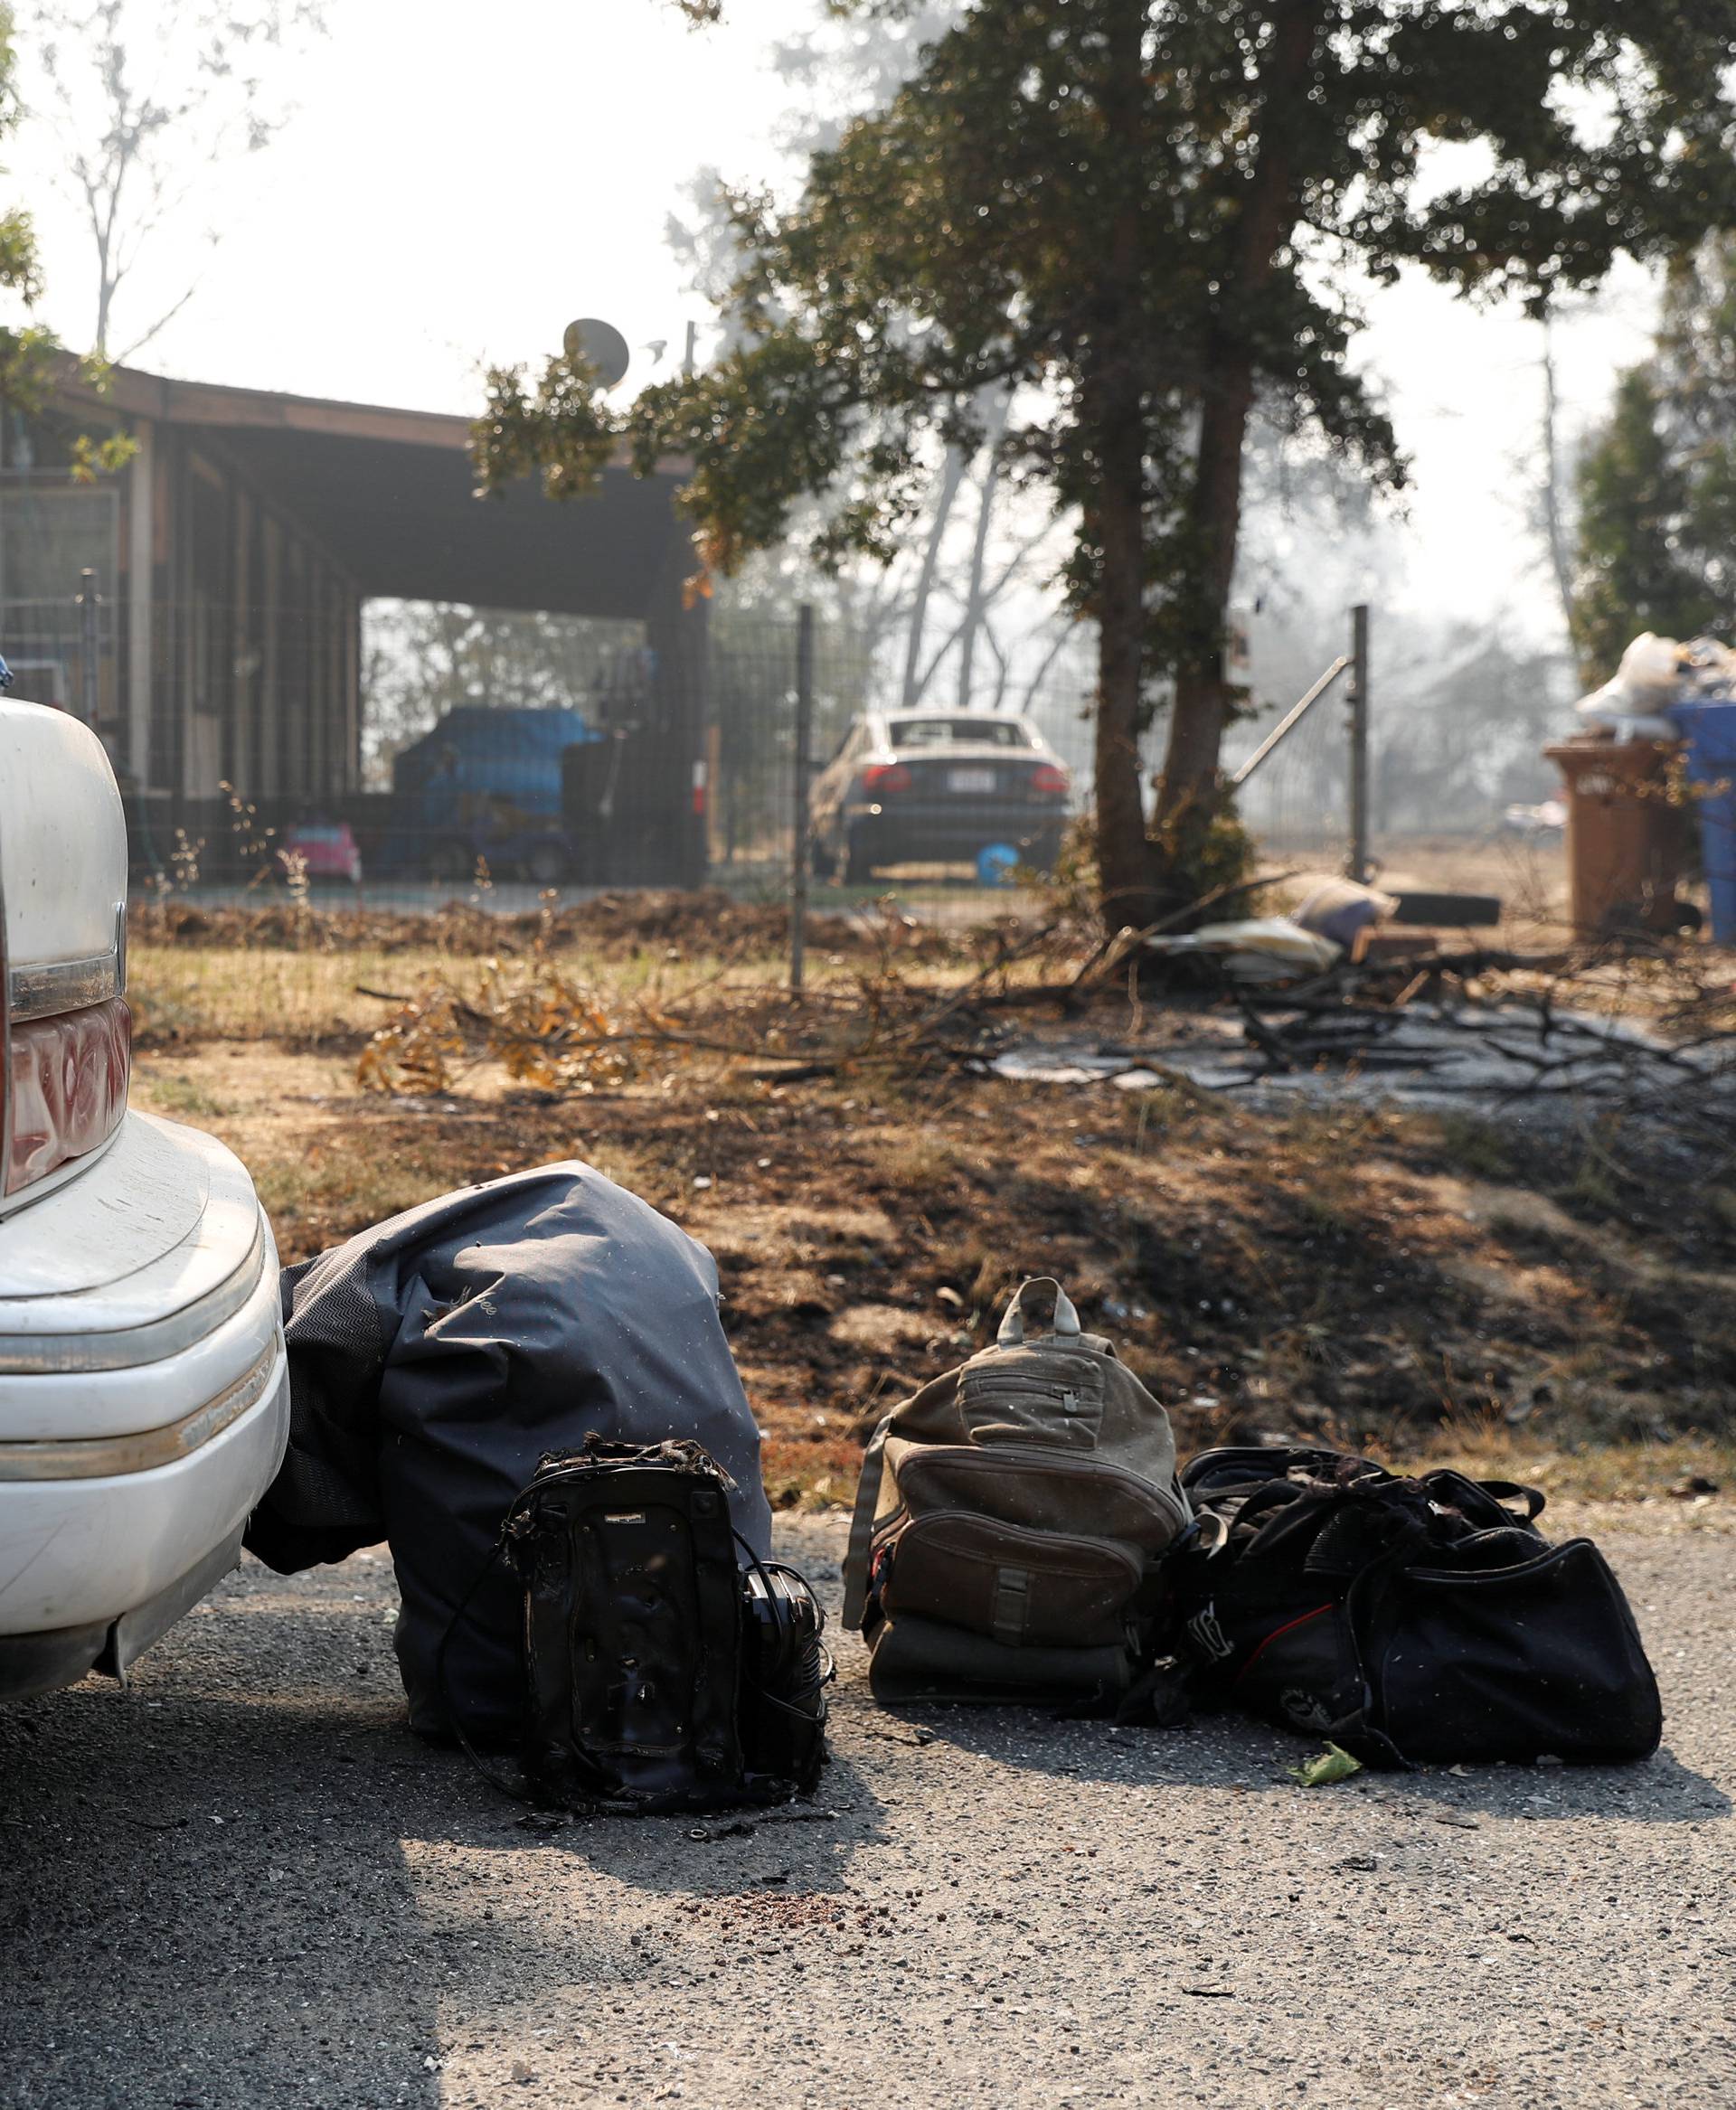 Charred luggages are seen next to a car on Quarterhorse Lane during the Clayton Fire at Lower Lake in California